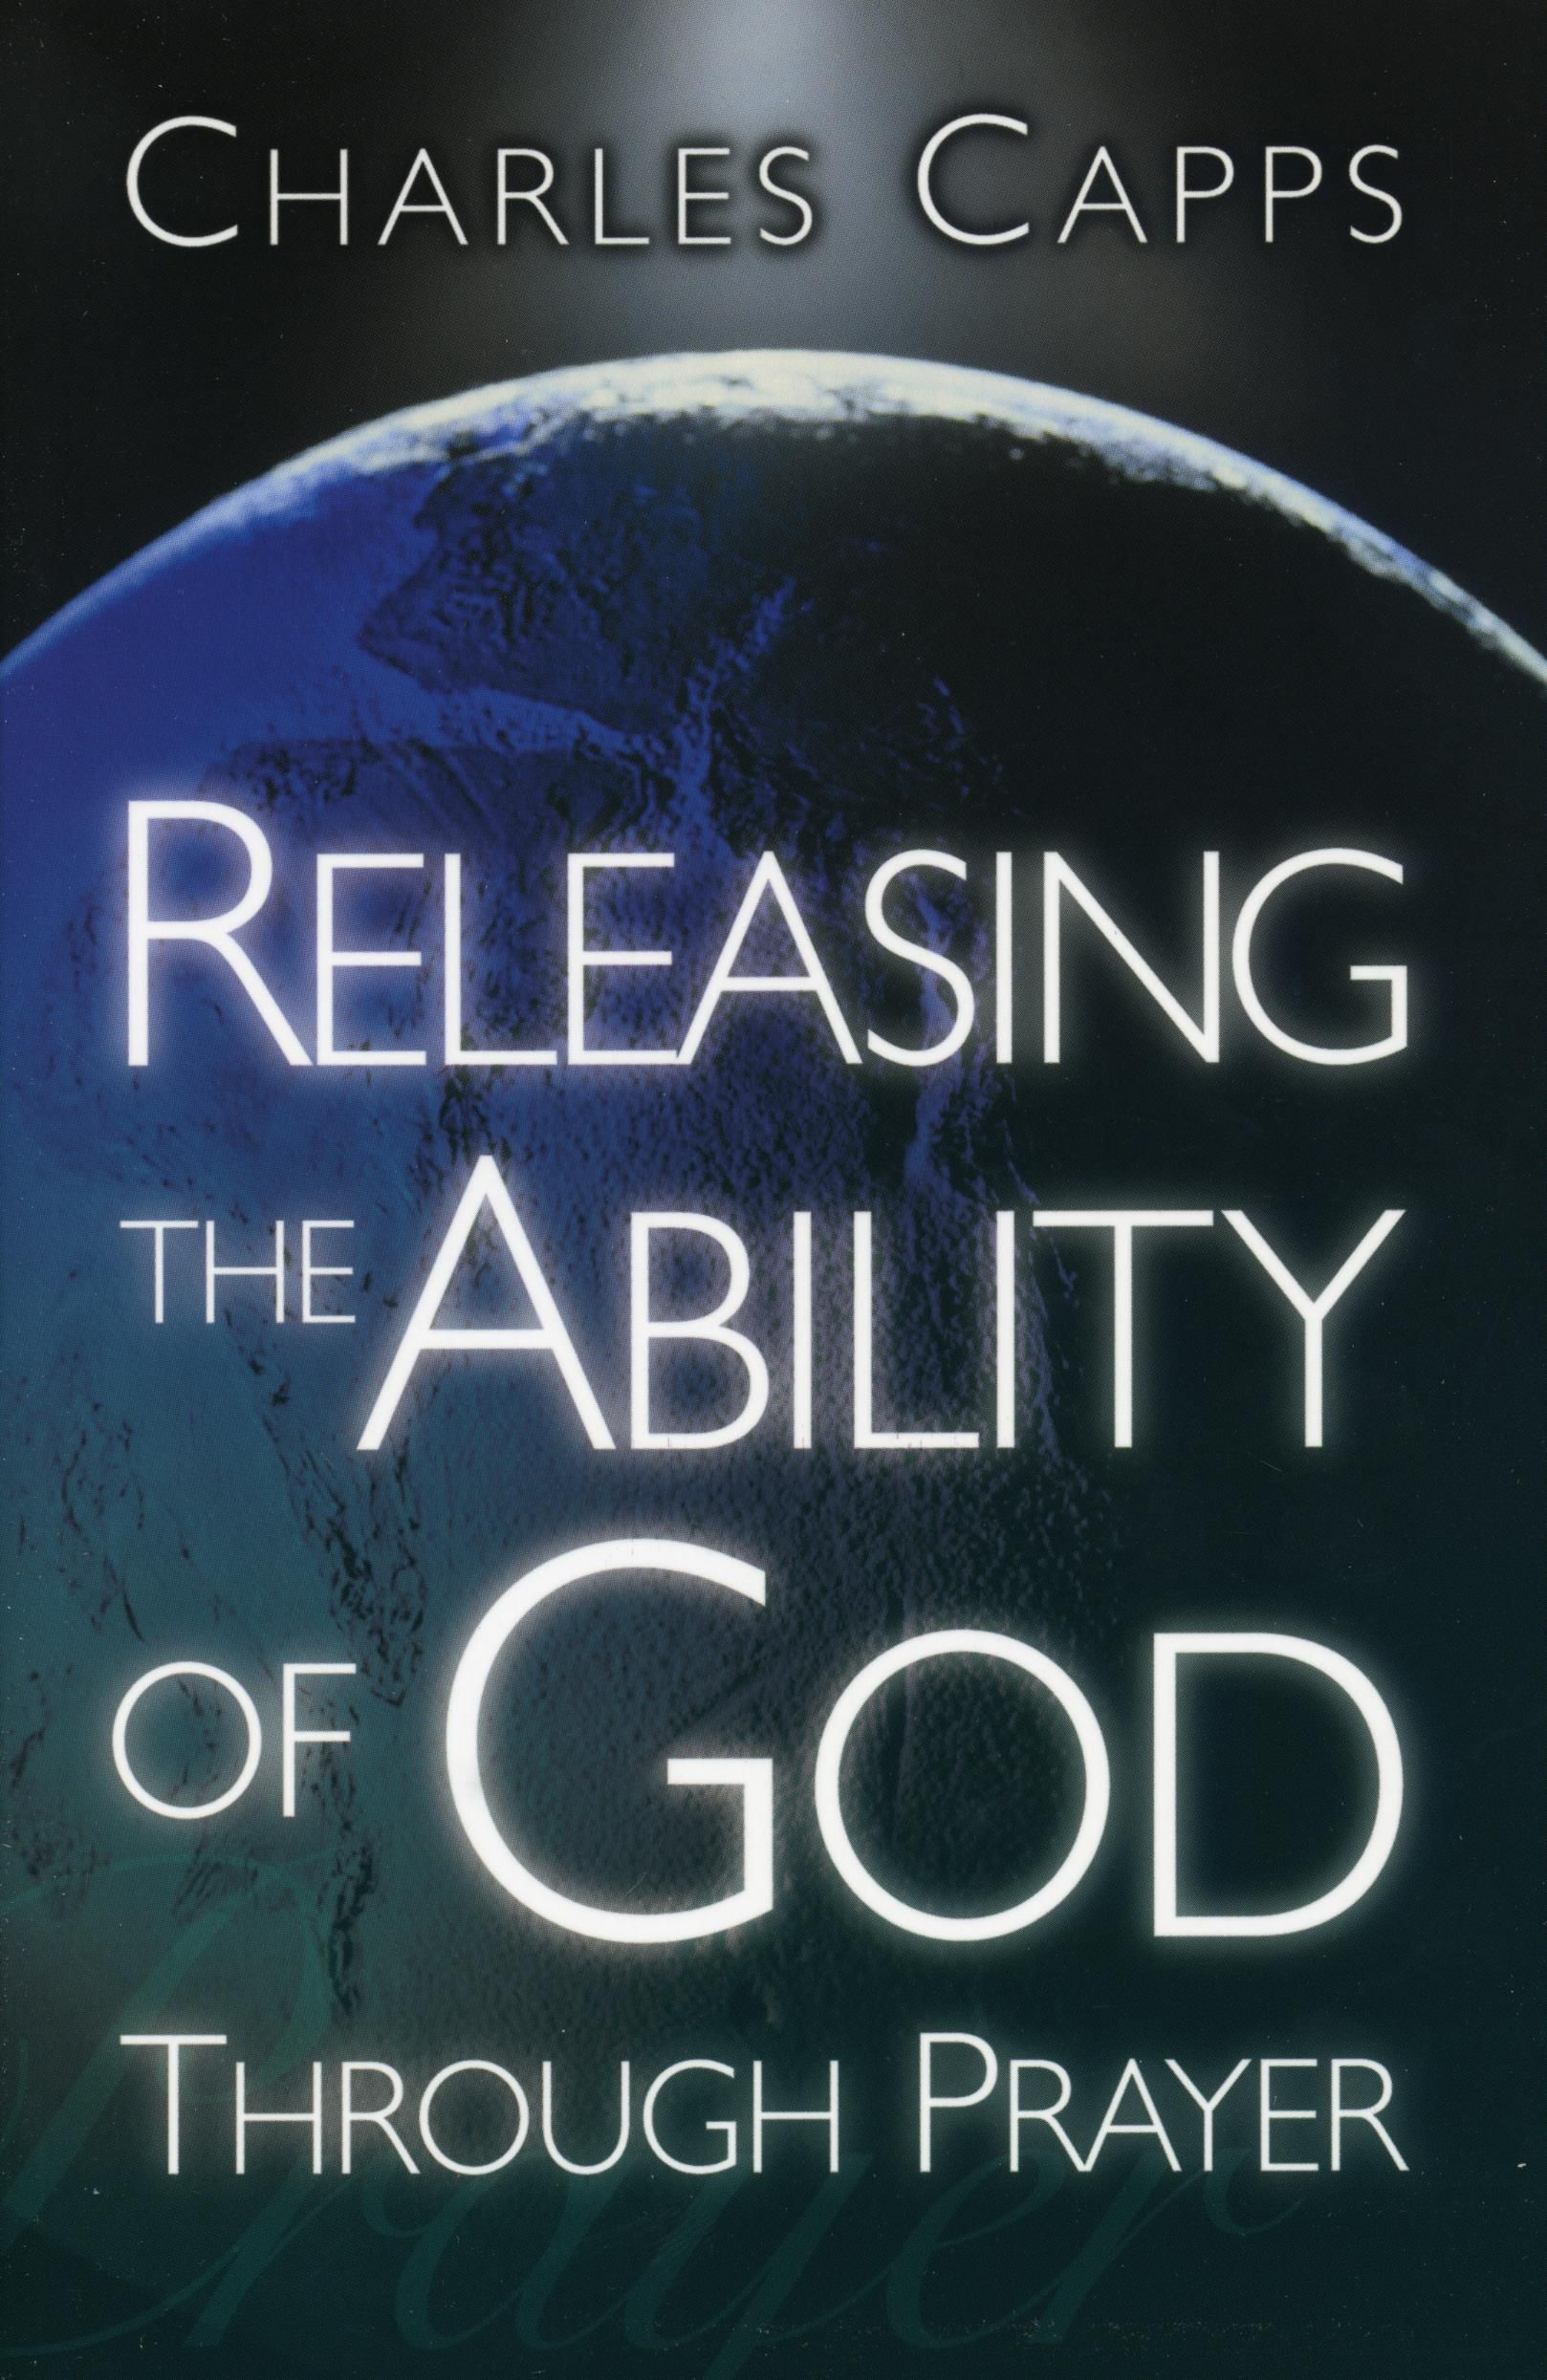 Englische Bücher - Charles Capps: Releasing the Ability of God